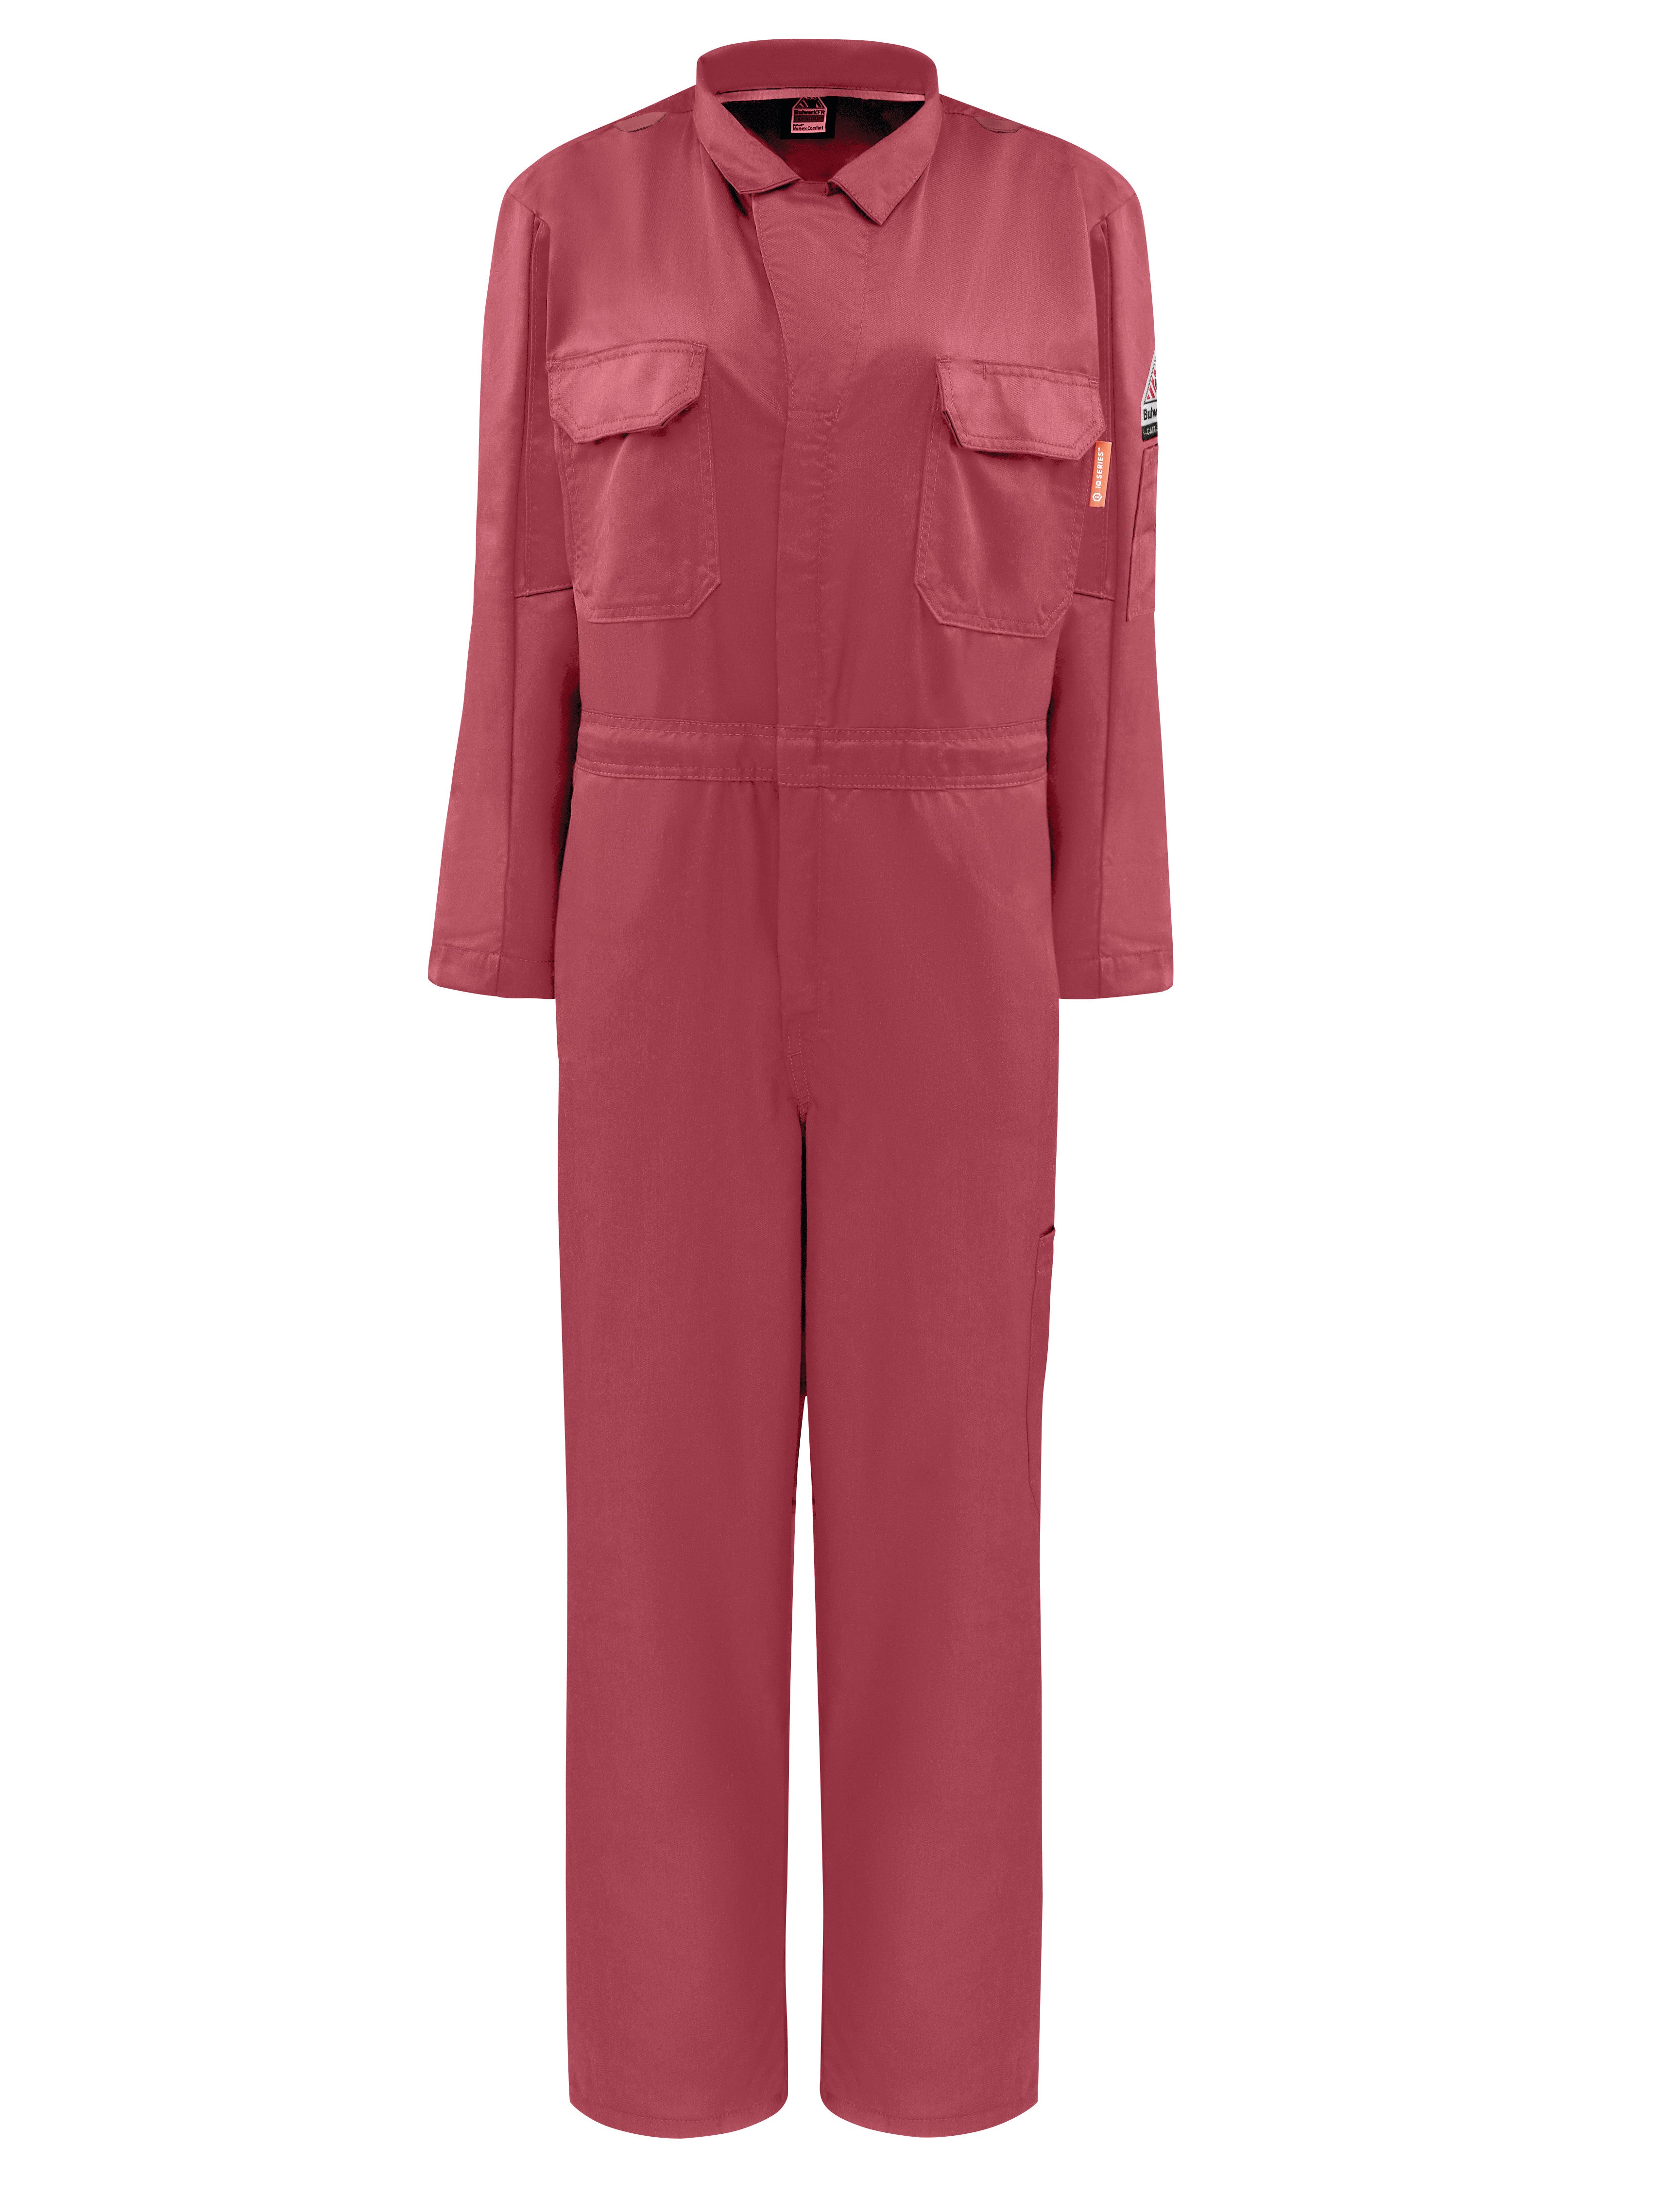 iQ Series Women’s Midweight Mobility Coverall QC23 - Red-eSafety Supplies, Inc